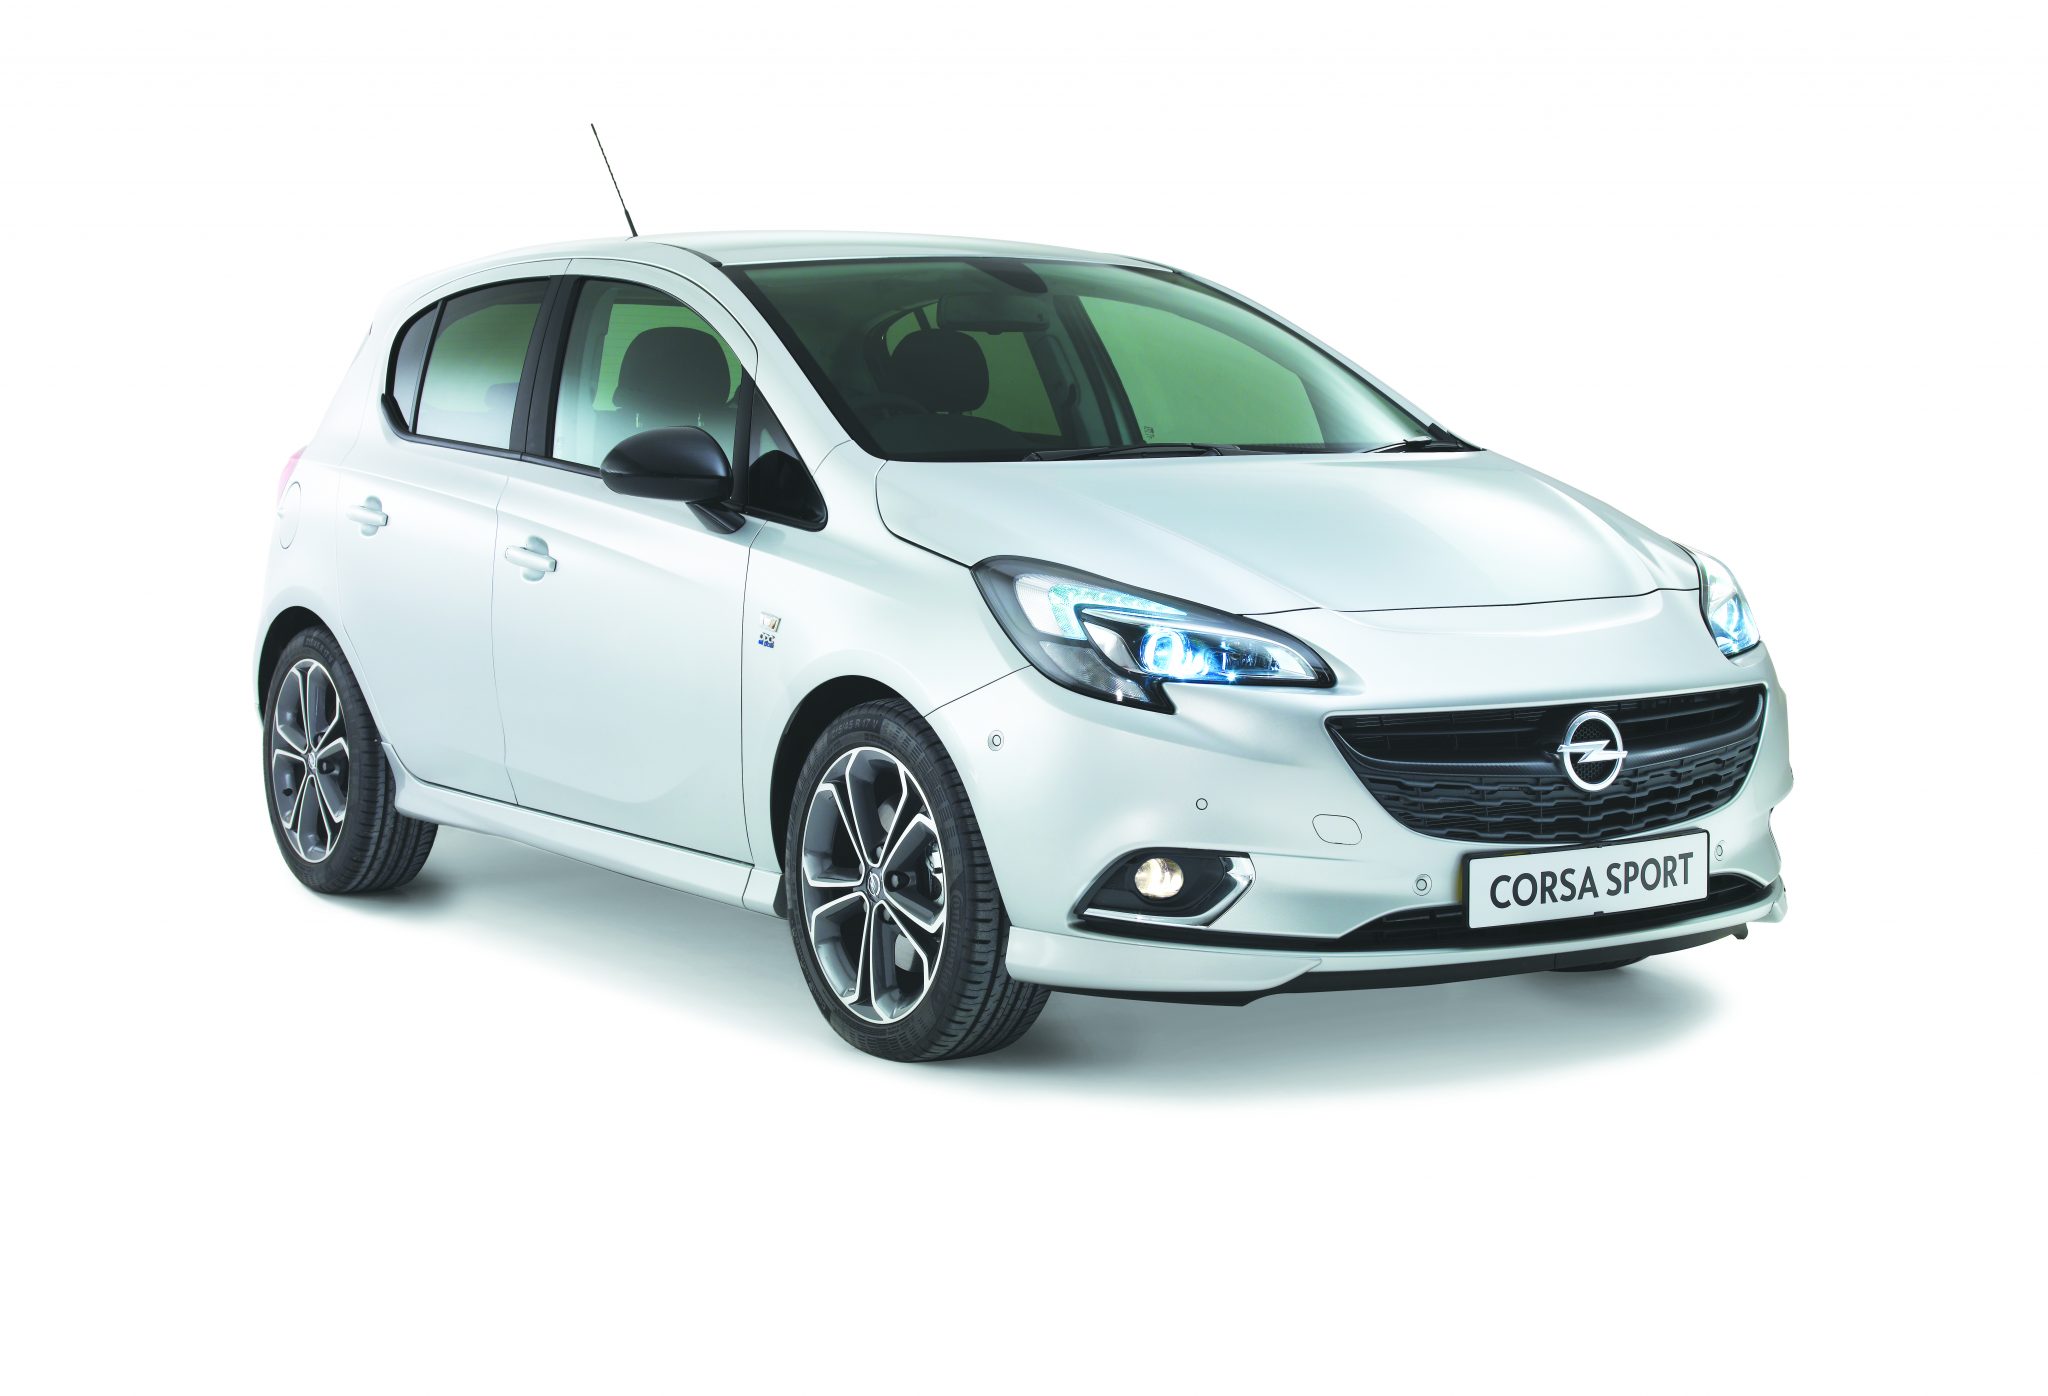 New Era Newspaper on X: This is the new Opel Corsa    / X